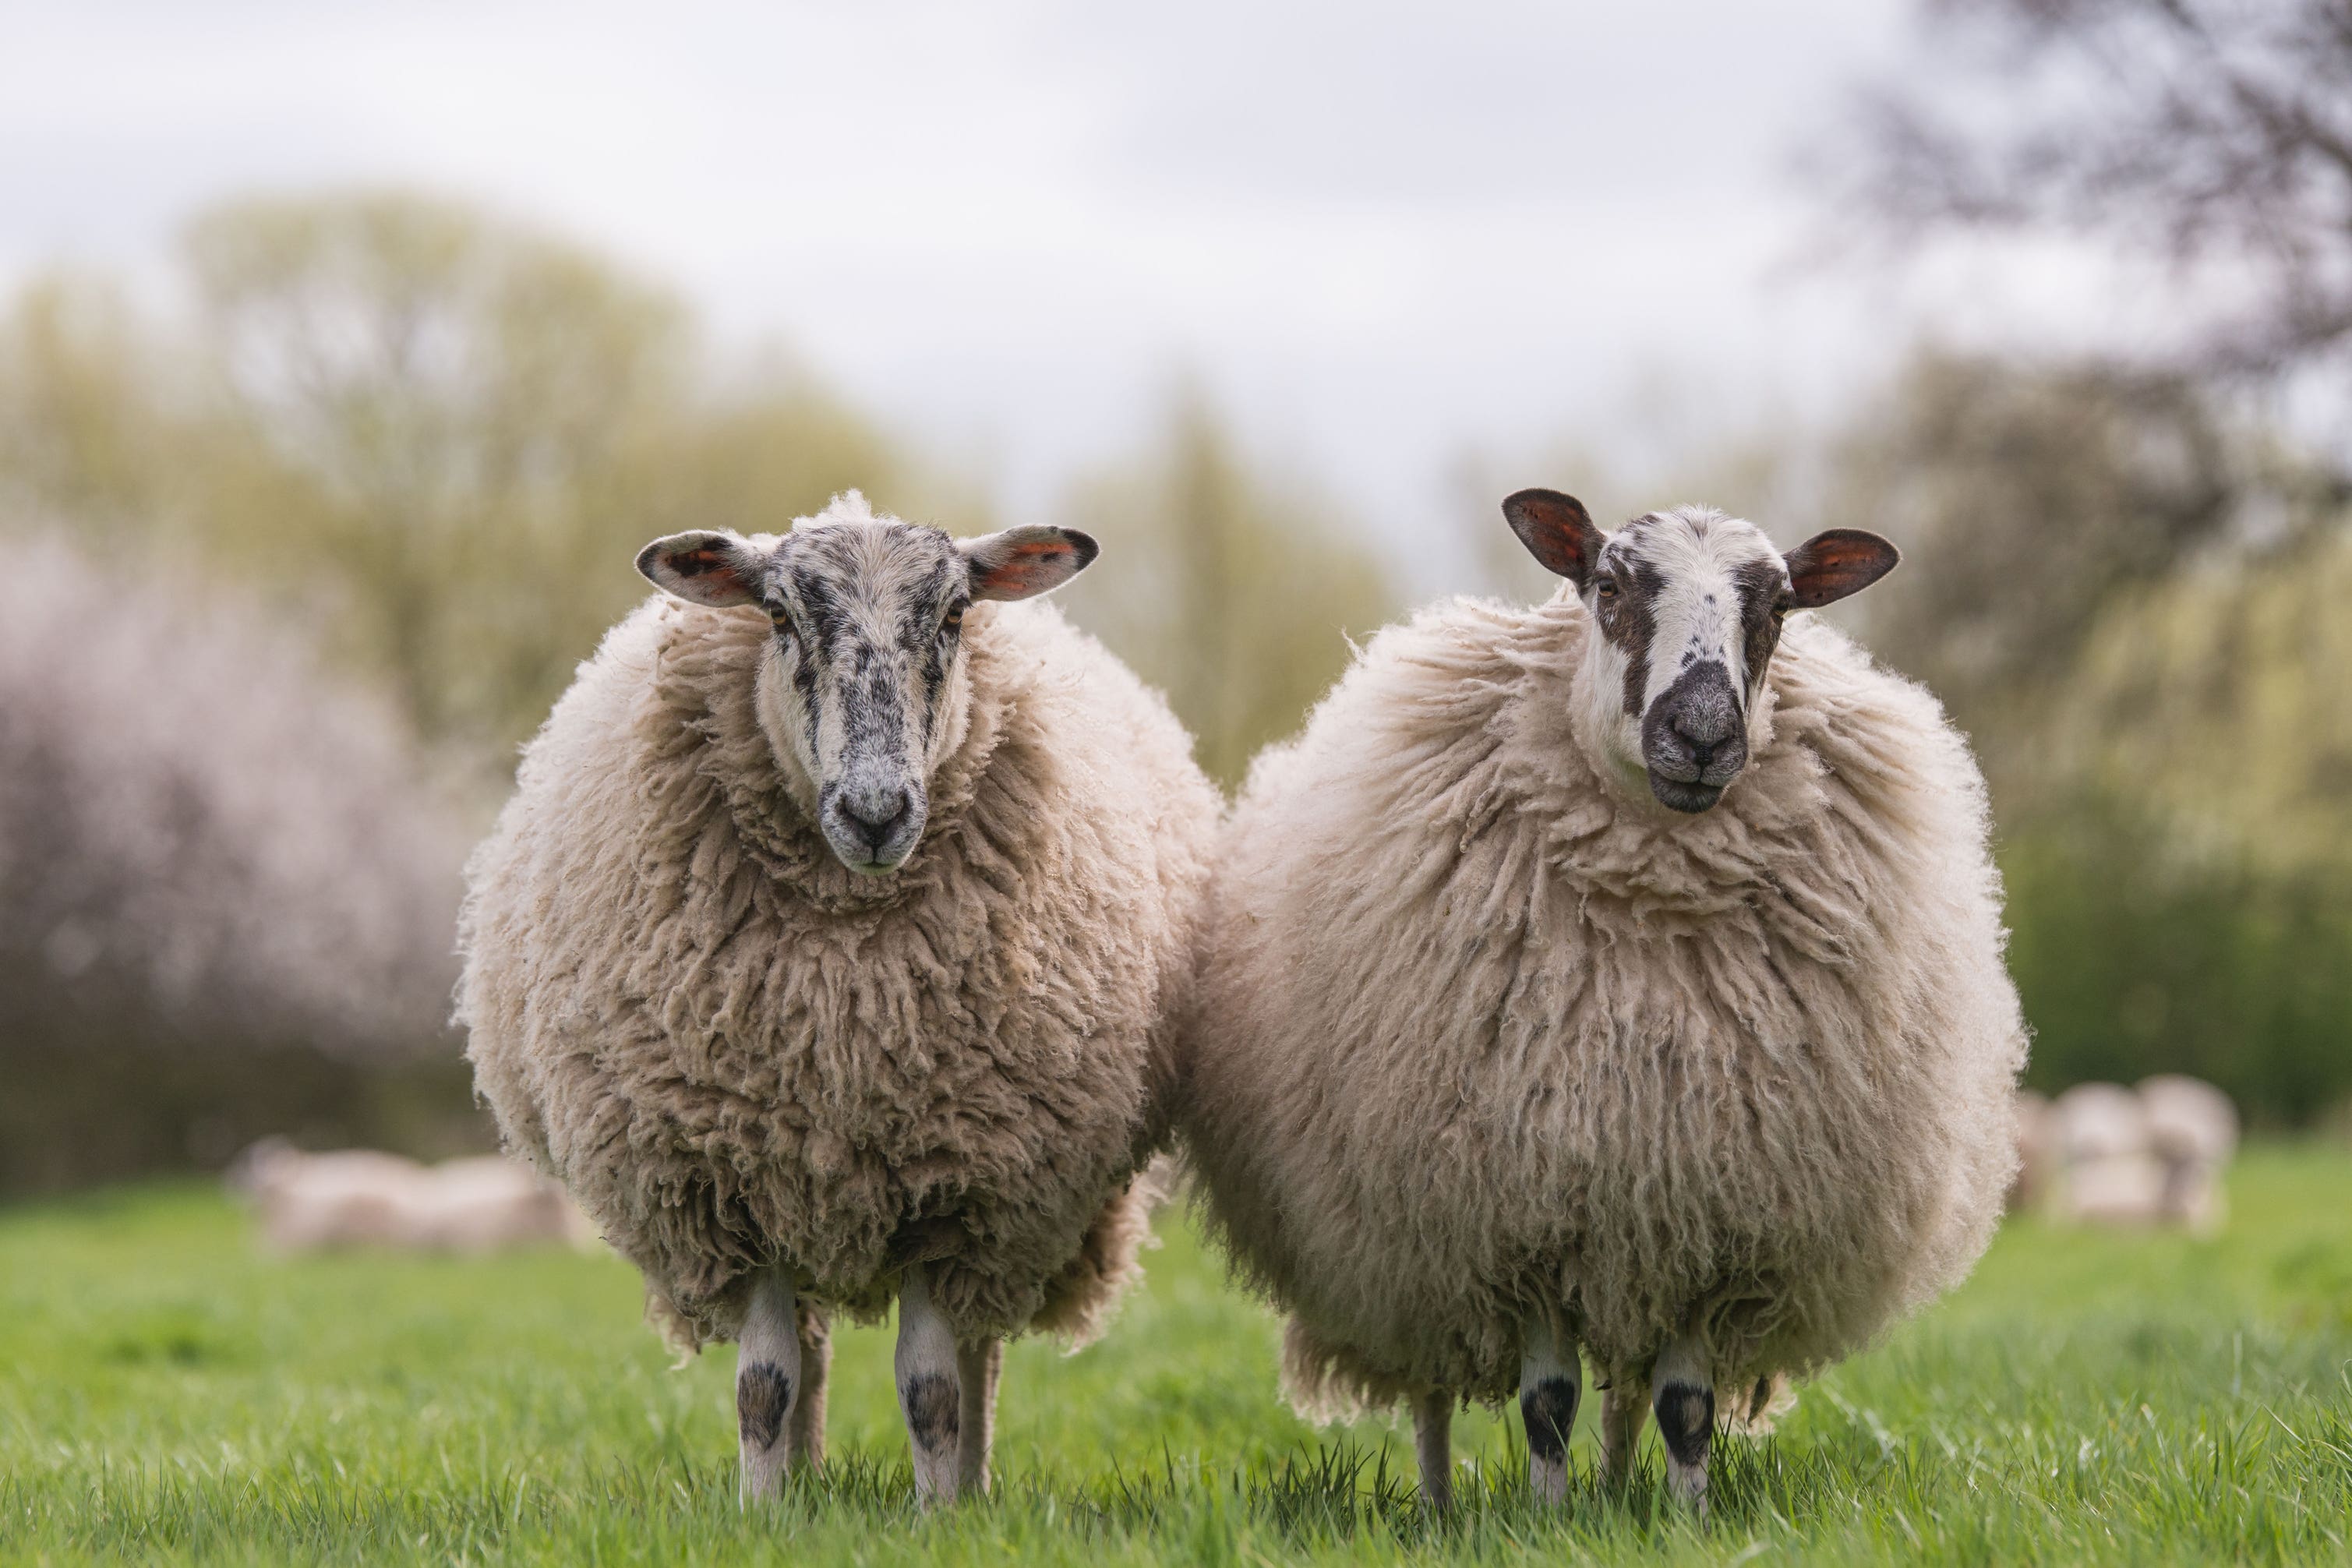 British farmers have vowed to burn their sheep’s wool rather than sell it as they’re offered prices “not worth” their while.